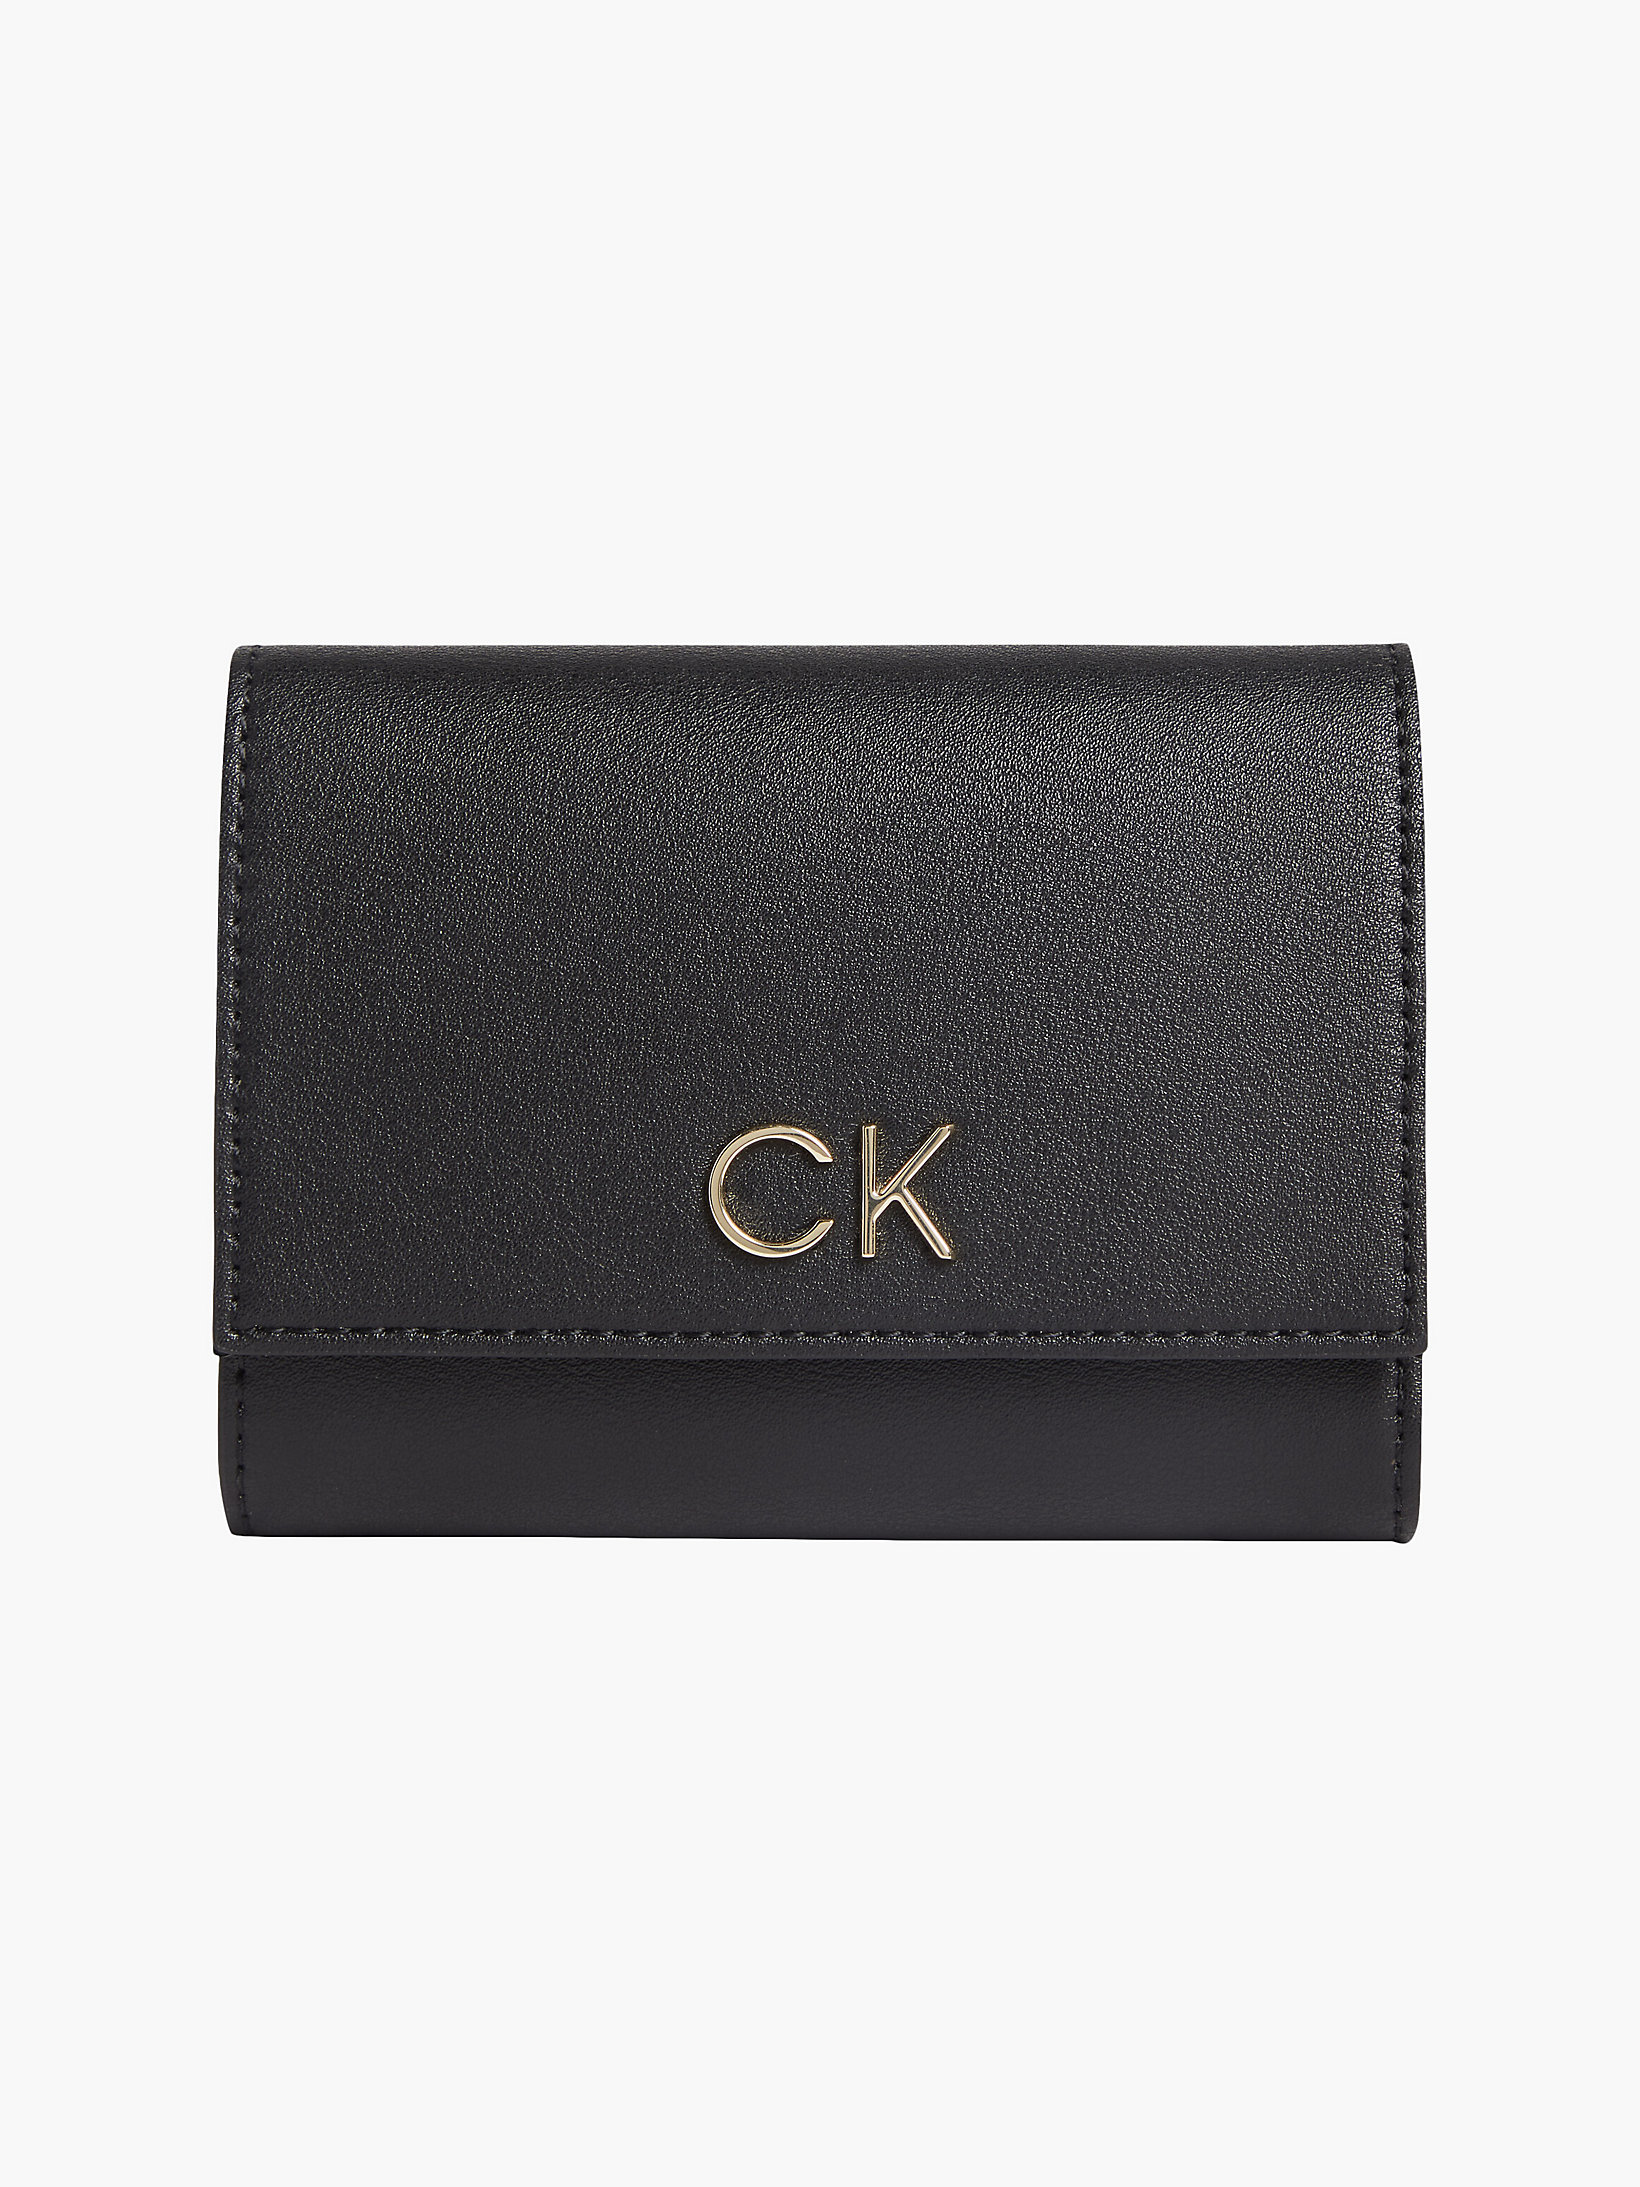 CK Black Recycled Faux Leather Trifold Rfid Wallet undefined women Calvin Klein